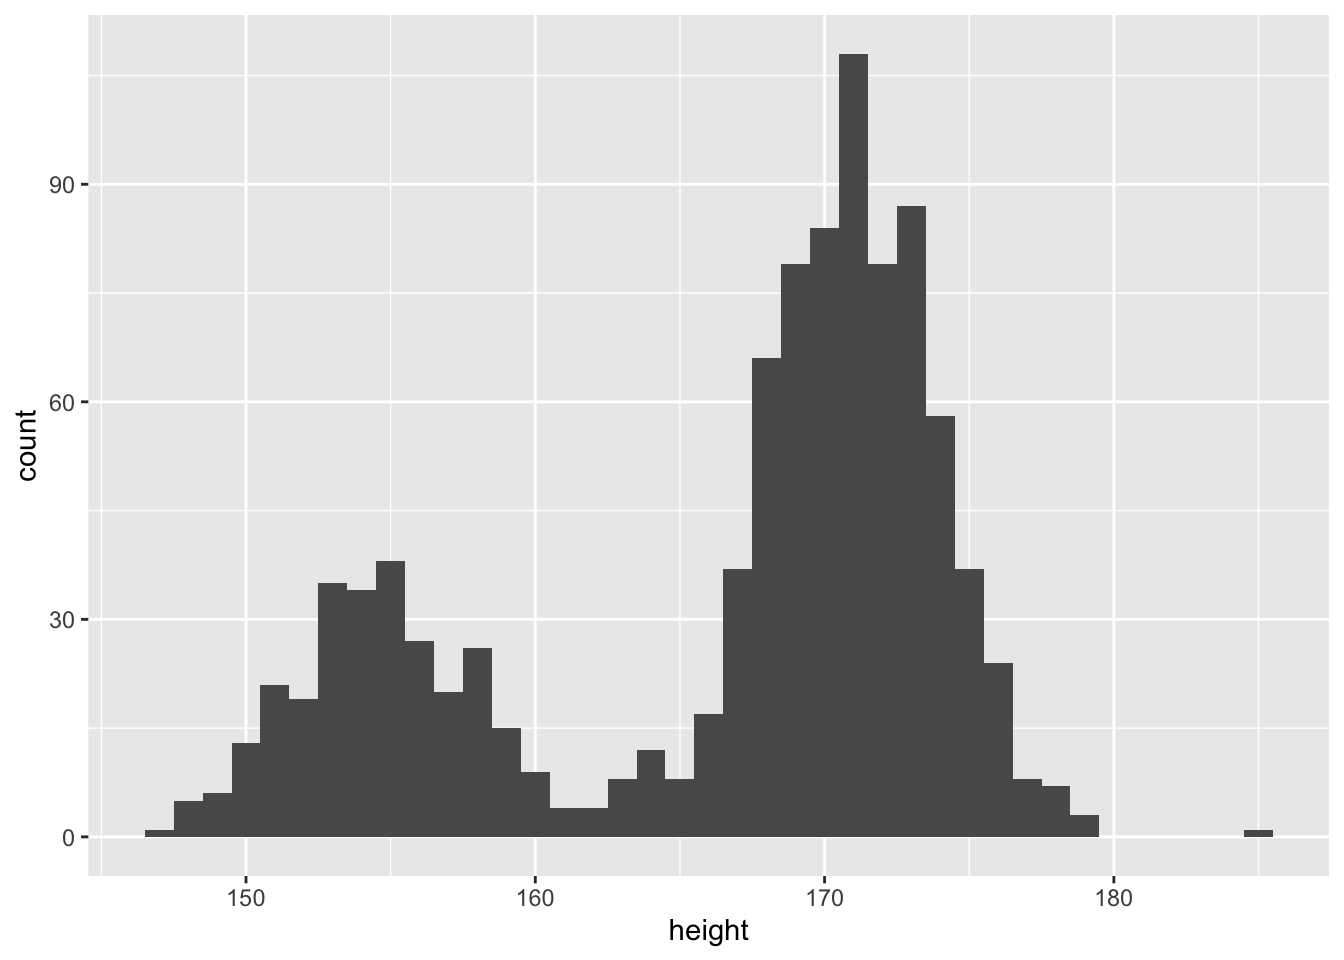 Histogram for sample from bimodal distribution of heights showing two modes, including a small hump around 155 centimetres and another larger hump at around 171 centimetres.